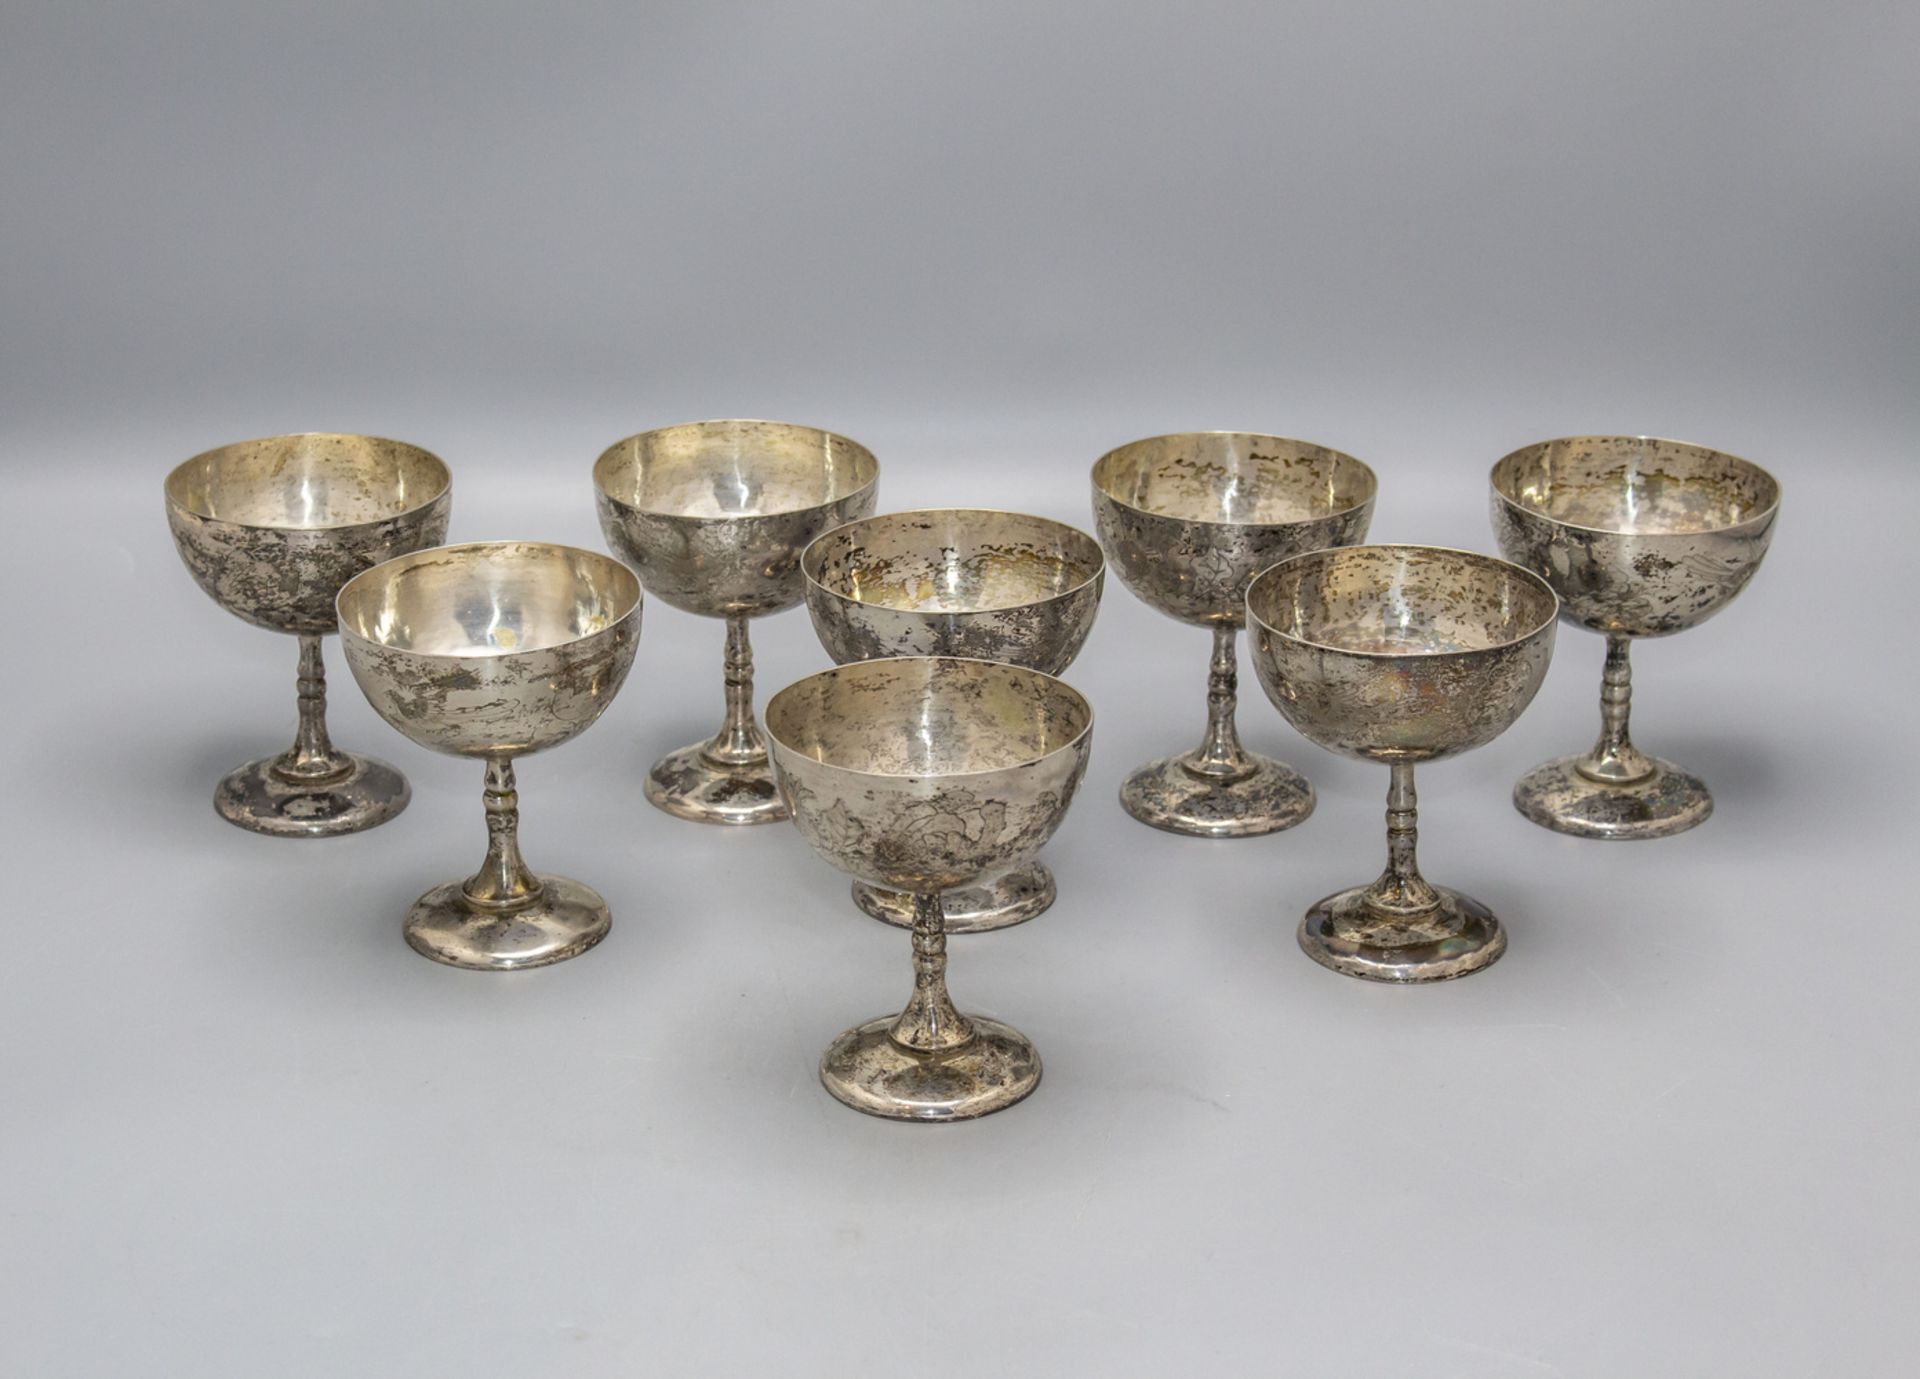 8 kleine Silberbecher / 8 small silver beakers, wohl China